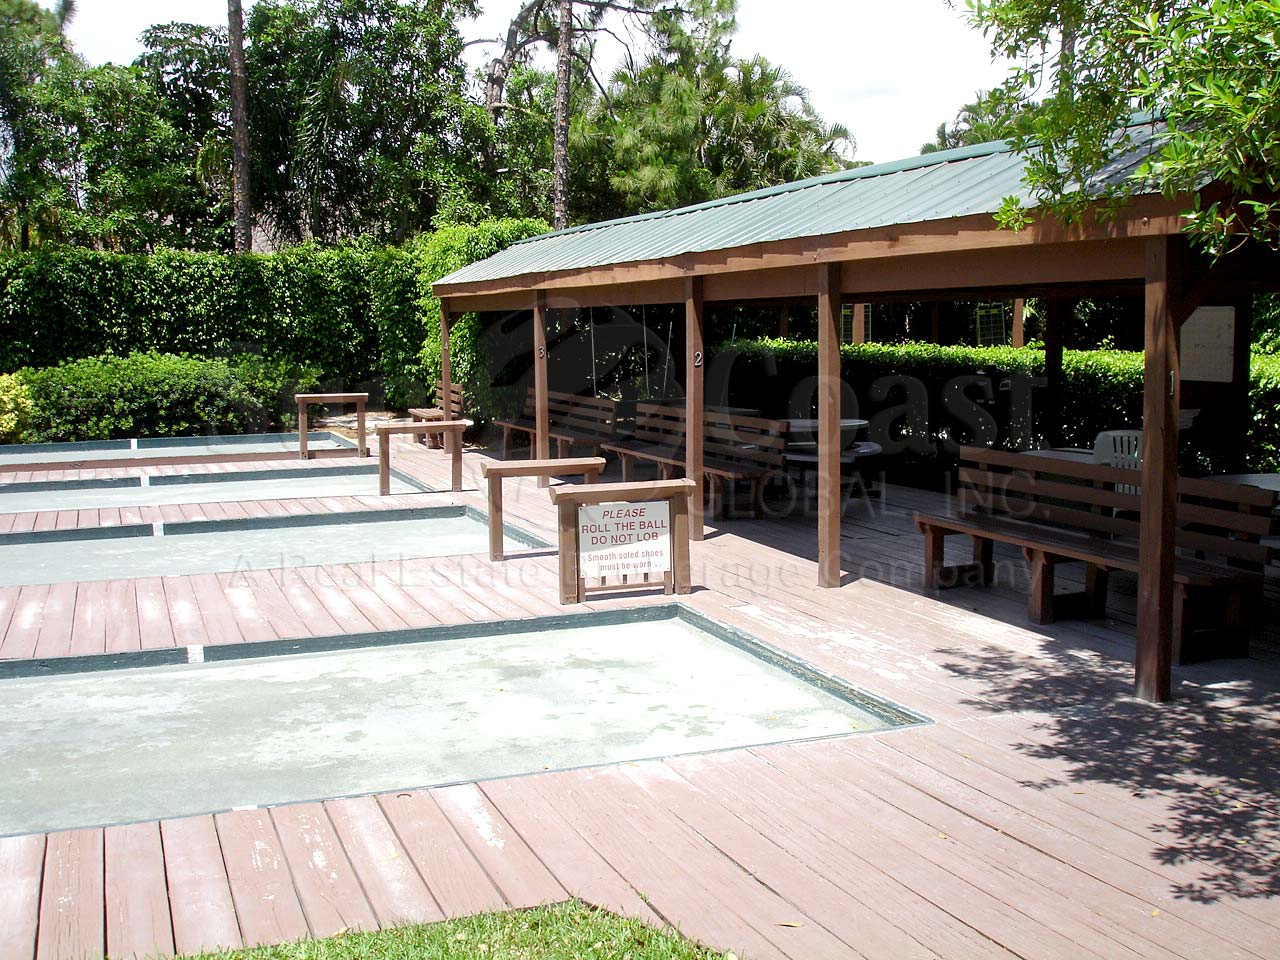 BAY FOREST Bocce Ball Courts